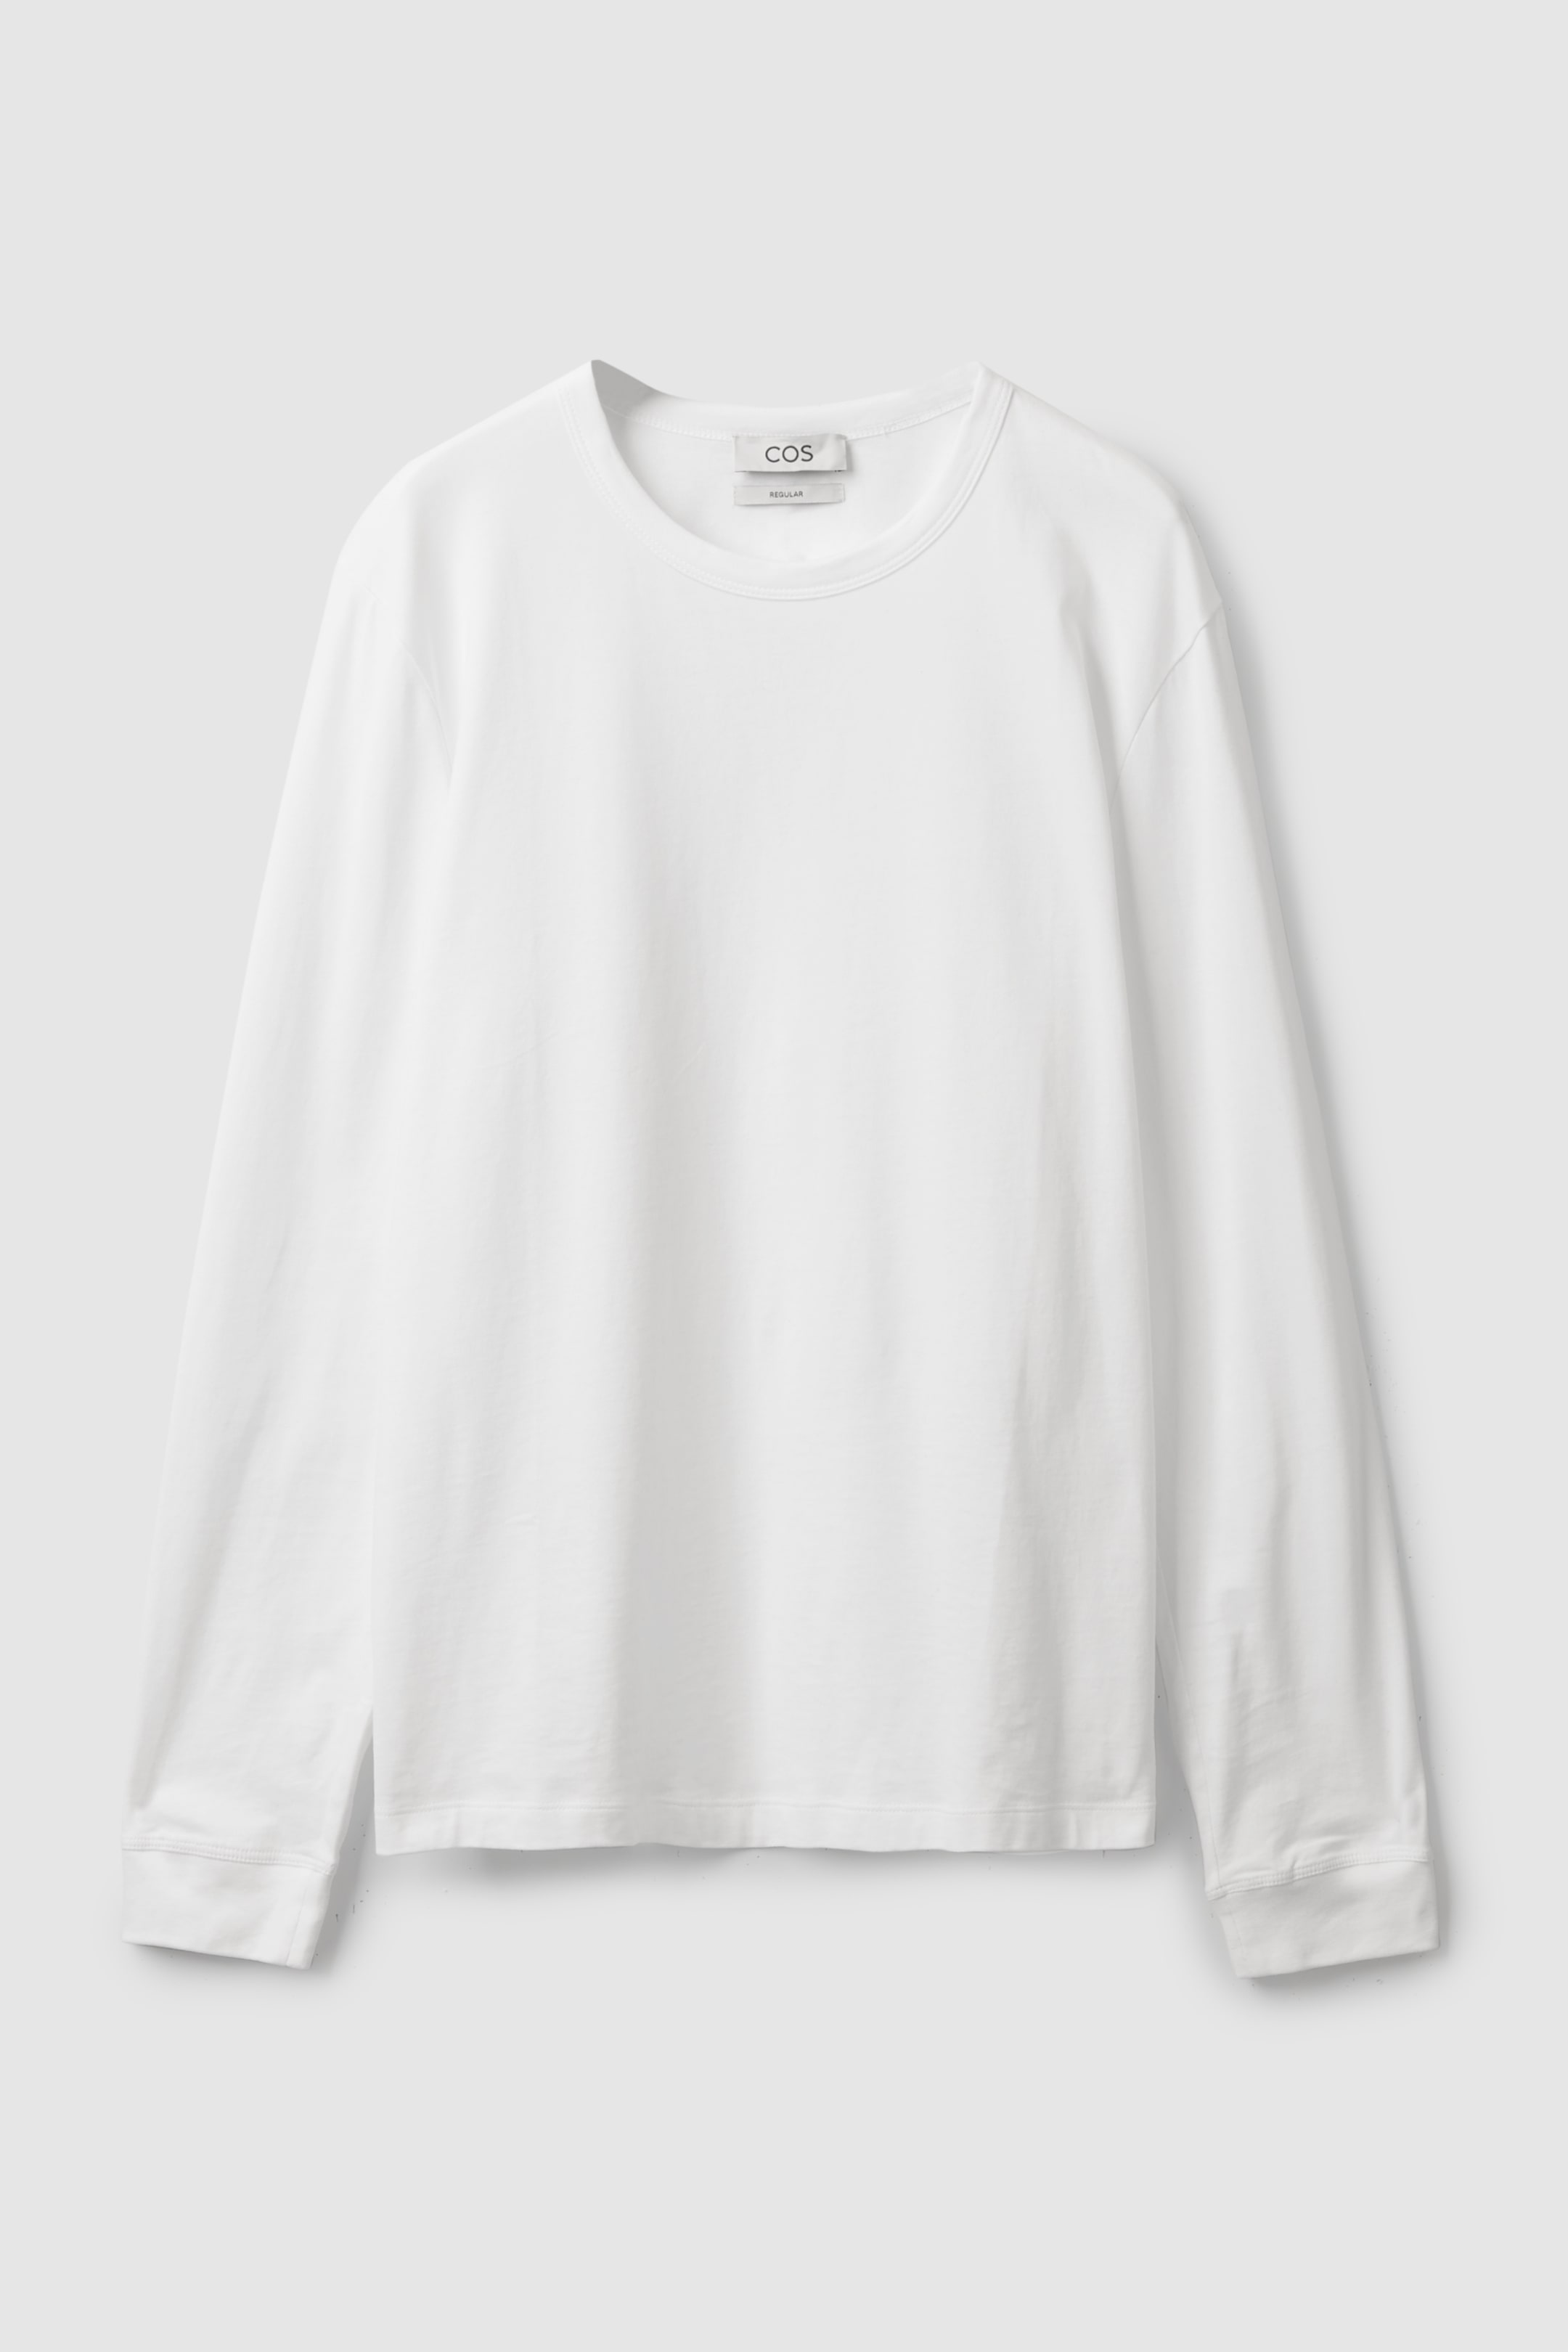 Front image of cos LONG SLEEVE T-SHIRT in WHITE